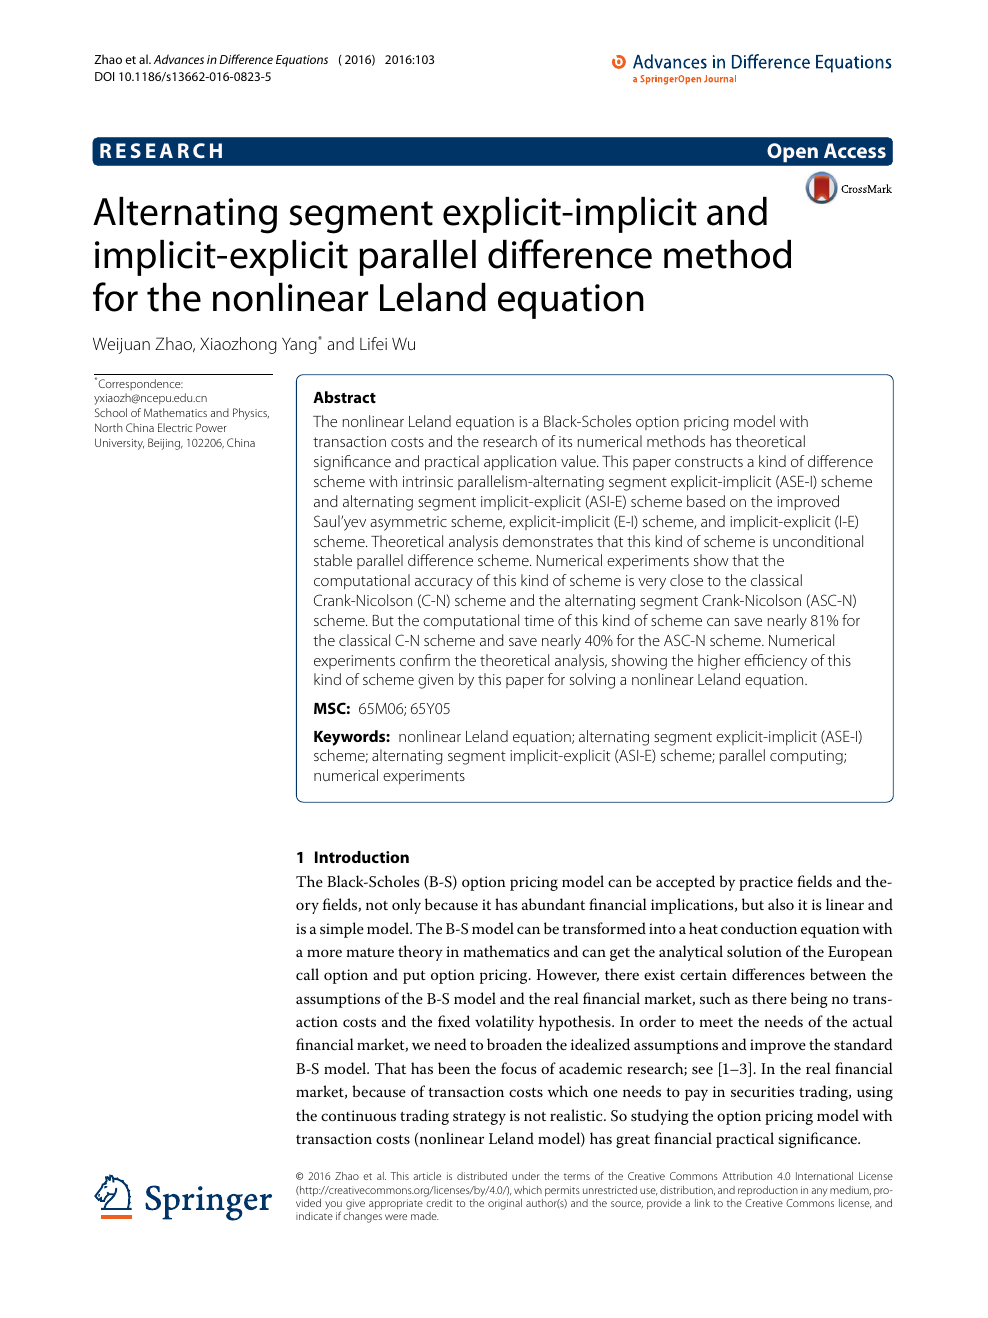 Alternating Segment Explicit Implicit And Implicit Explicit Parallel Difference Method For The Nonlinear Leland Equation Topic Of Research Paper In Mathematics Download Scholarly Article Pdf And Read For Free On Cyberleninka Open Science